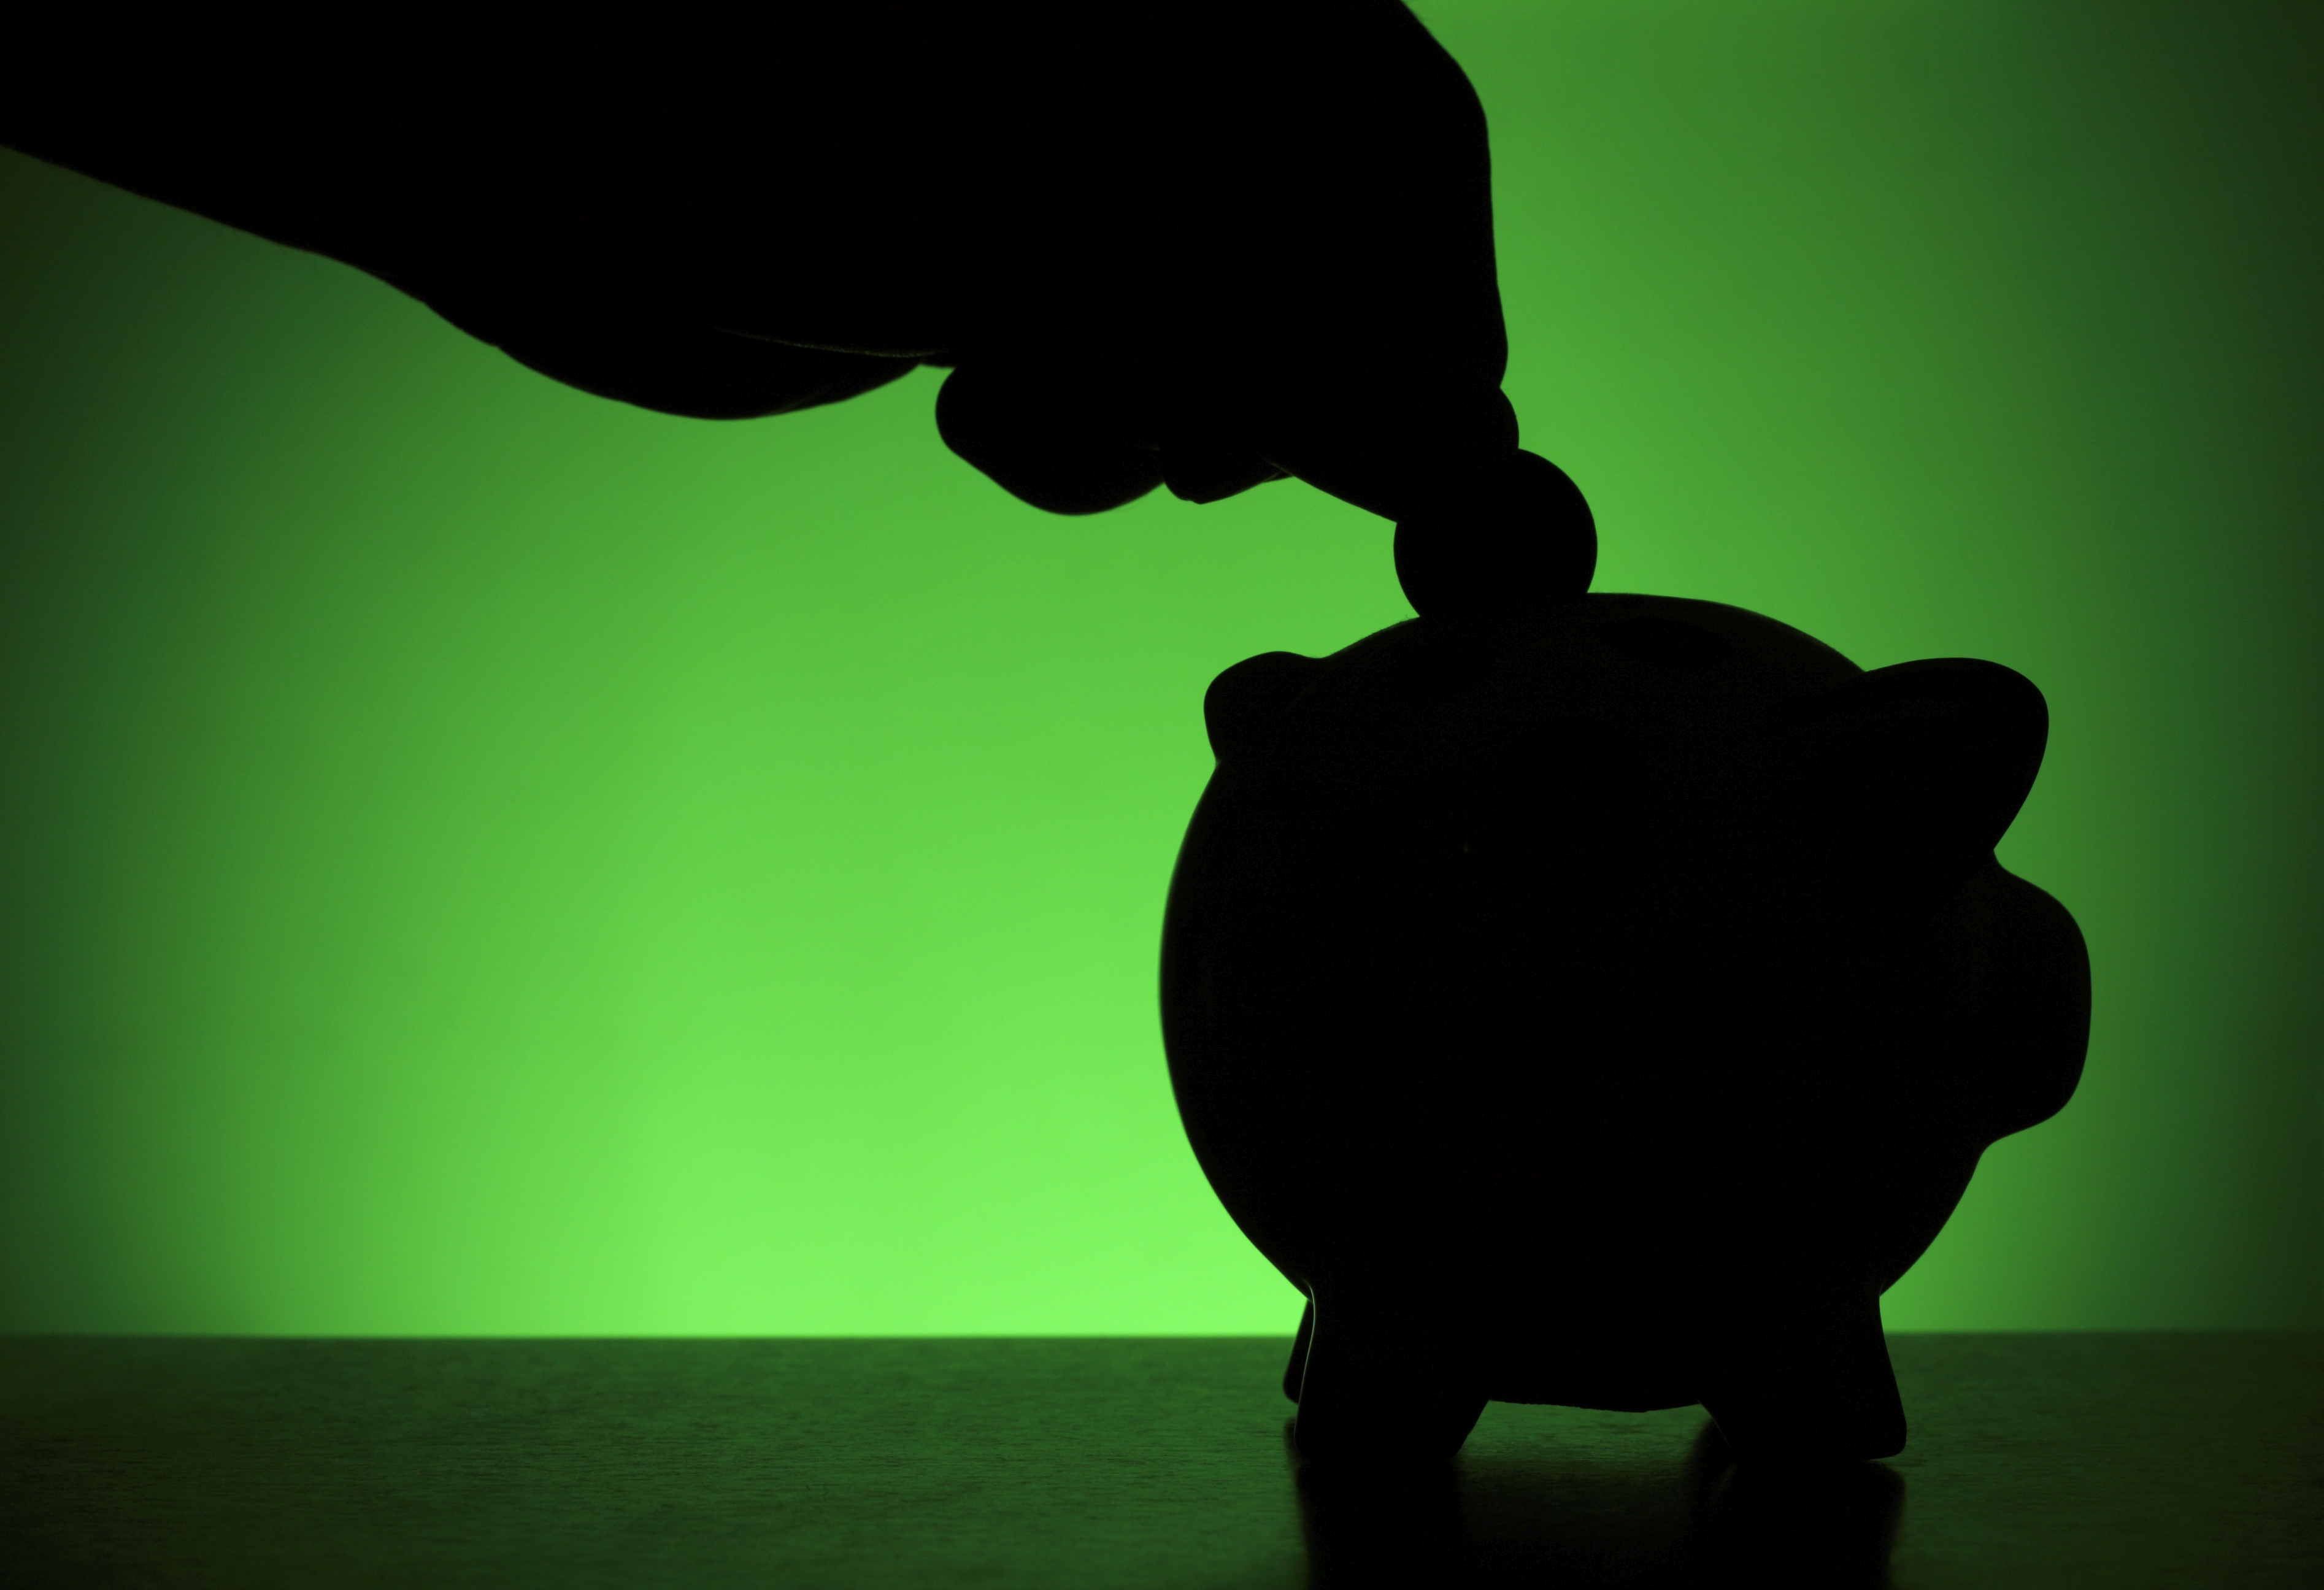 silhouette of a hand placing a coin into a piggy bank set against a green background